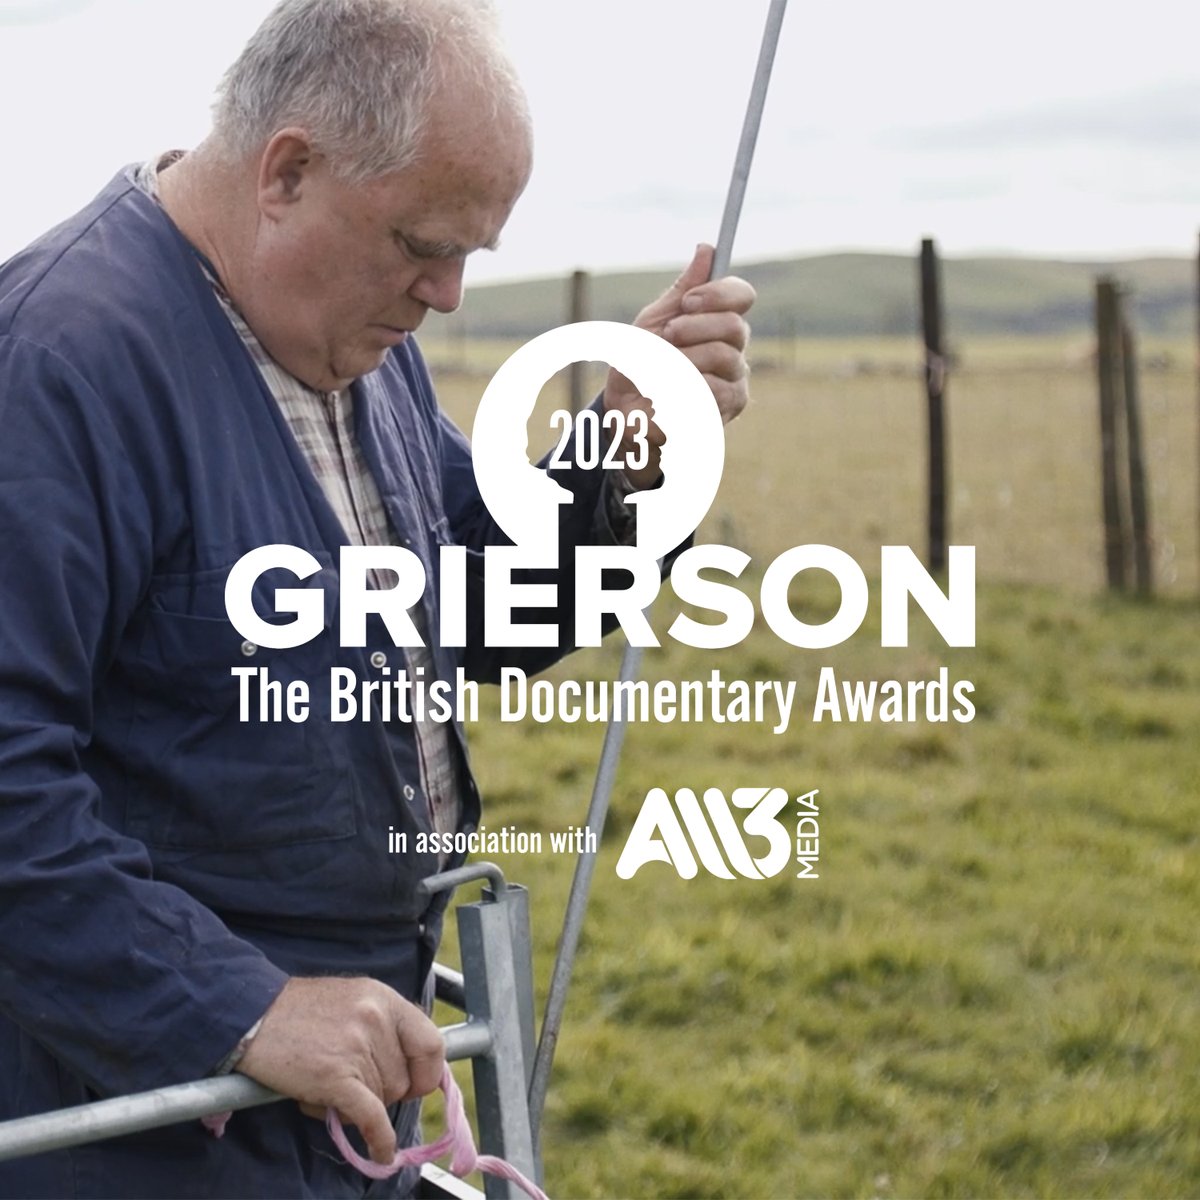 Unbelievable news this morning that Heart Valley has been Shortlisted for the GRIERSON AWARDS (@griersontrust). To be included amongst friends, films and programmes I deeply respect and admire today is a privilege and a staggering honour. #GriersonAwards

griersontrust.org/grierson-award…